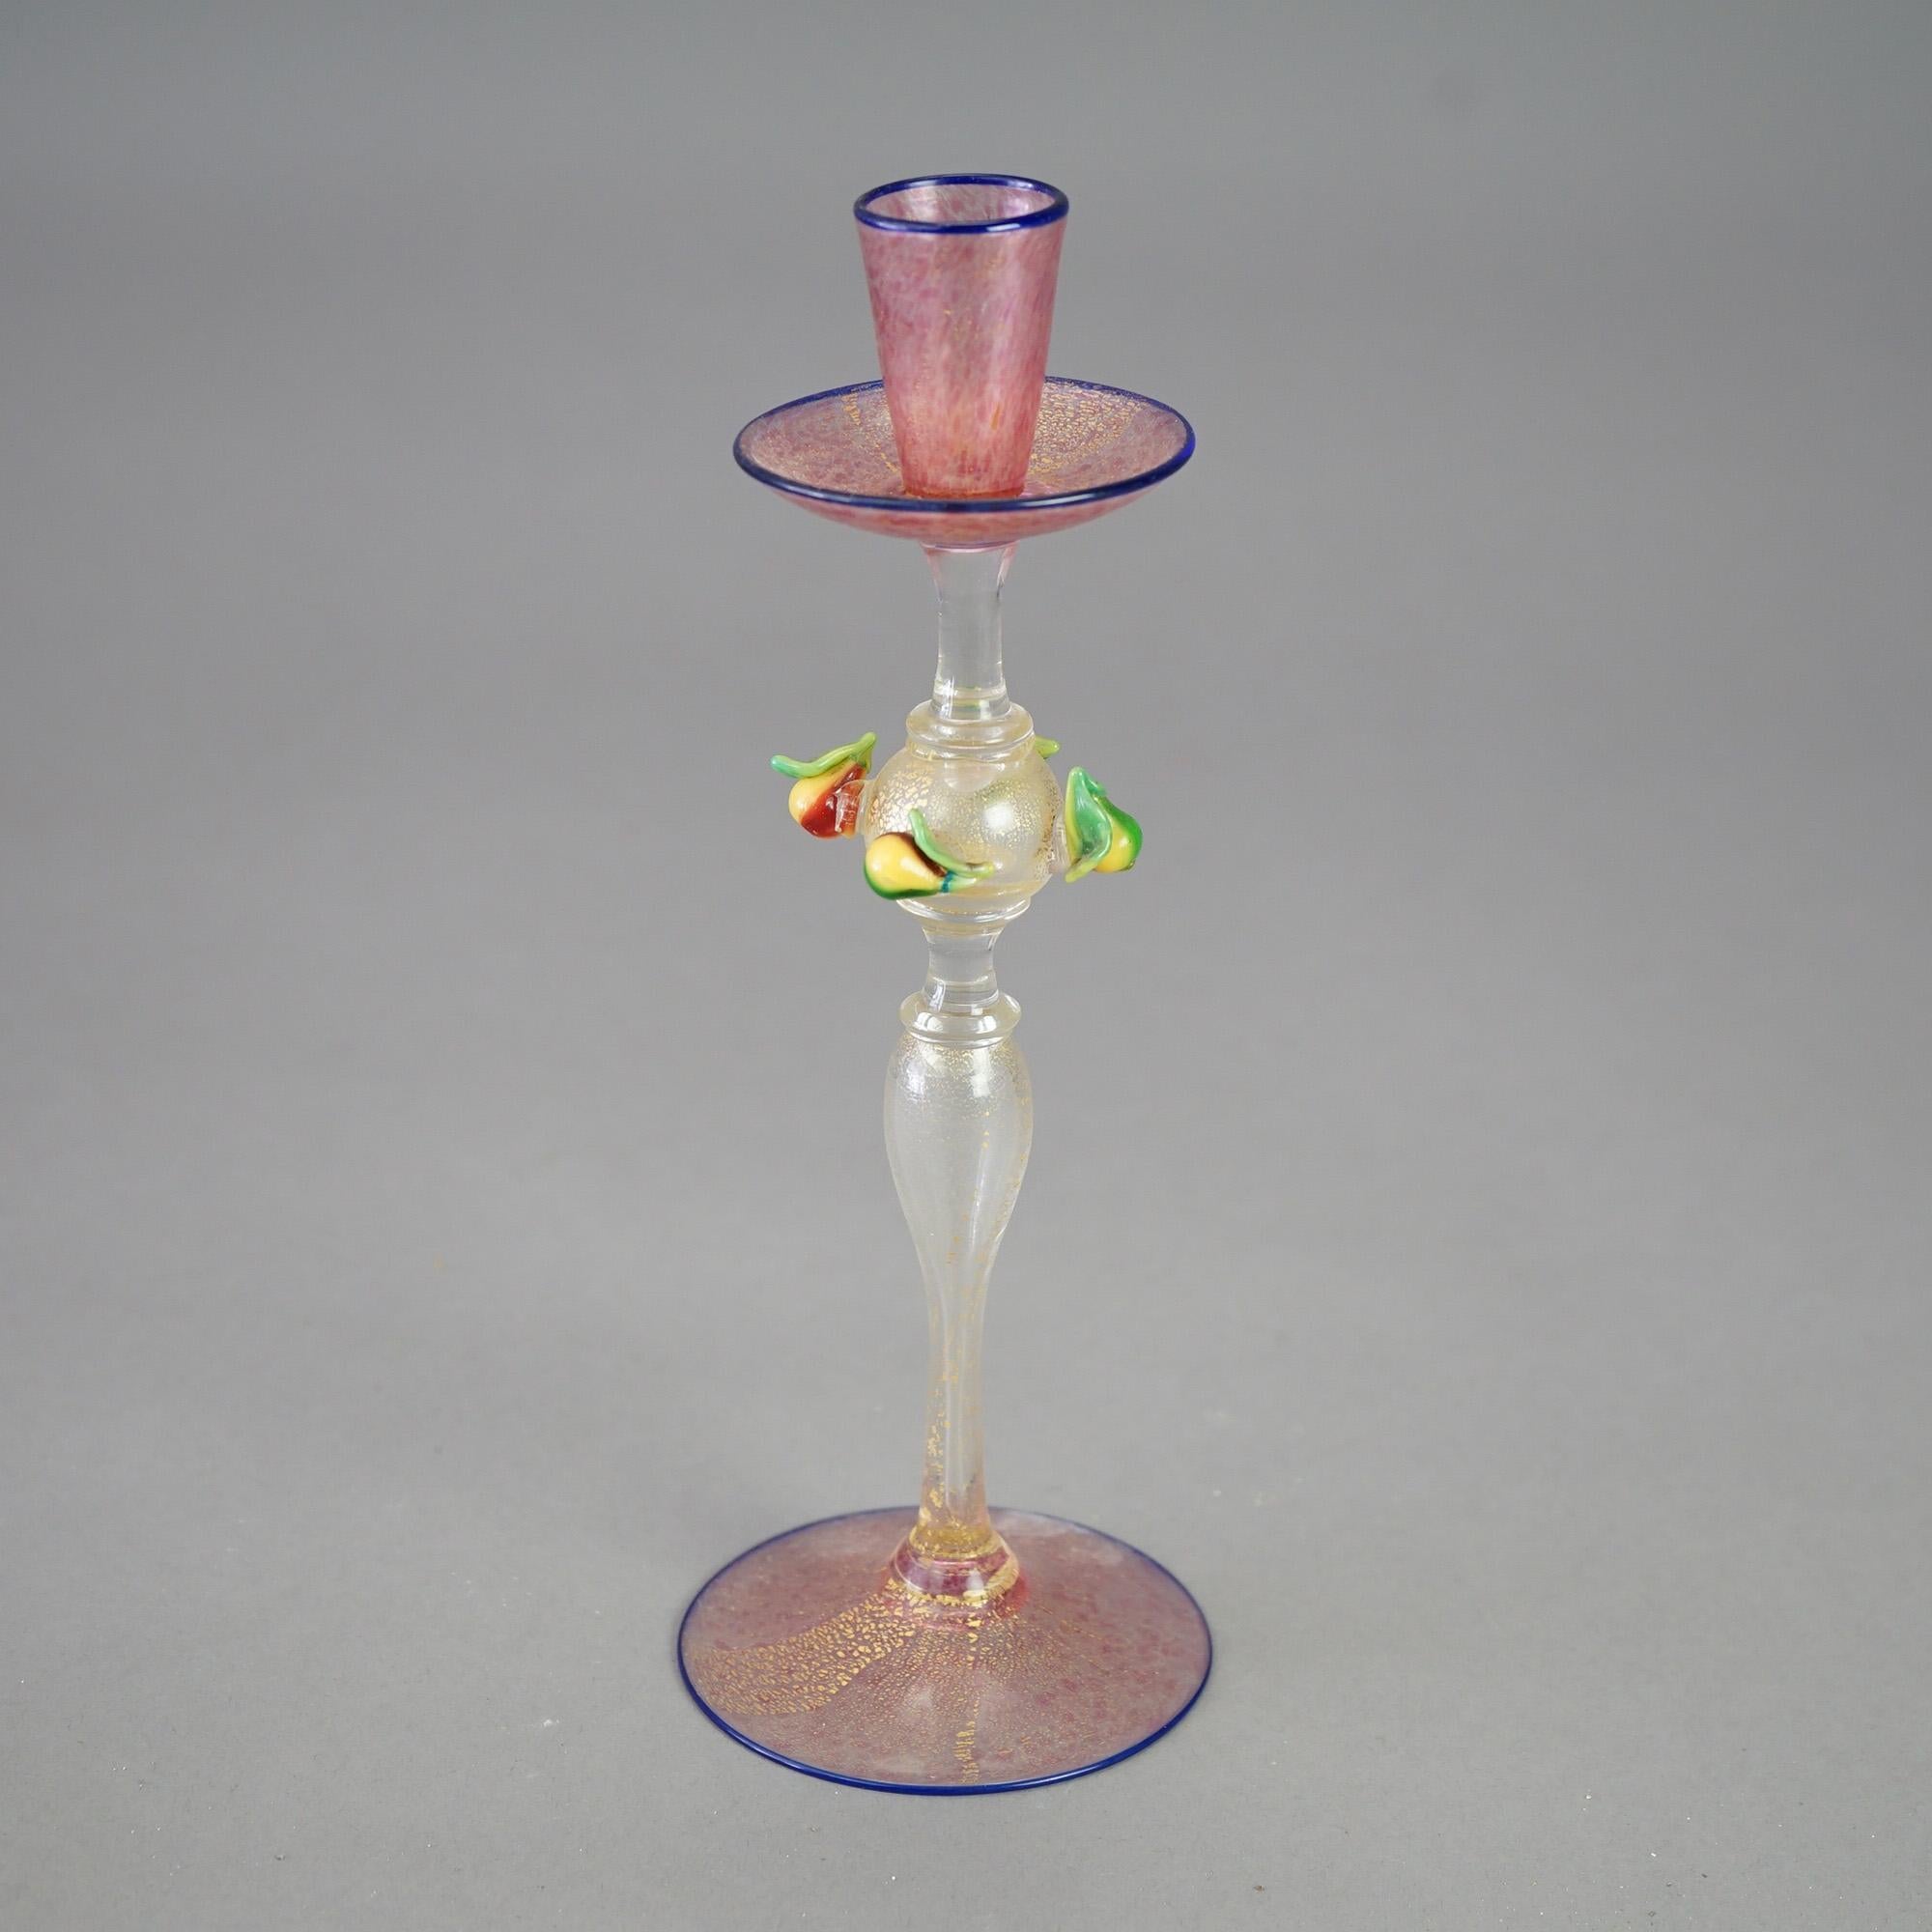 Antique Pair of Venetian Murano Art Glass Candlesticks with Pears Circa 1920 For Sale 2